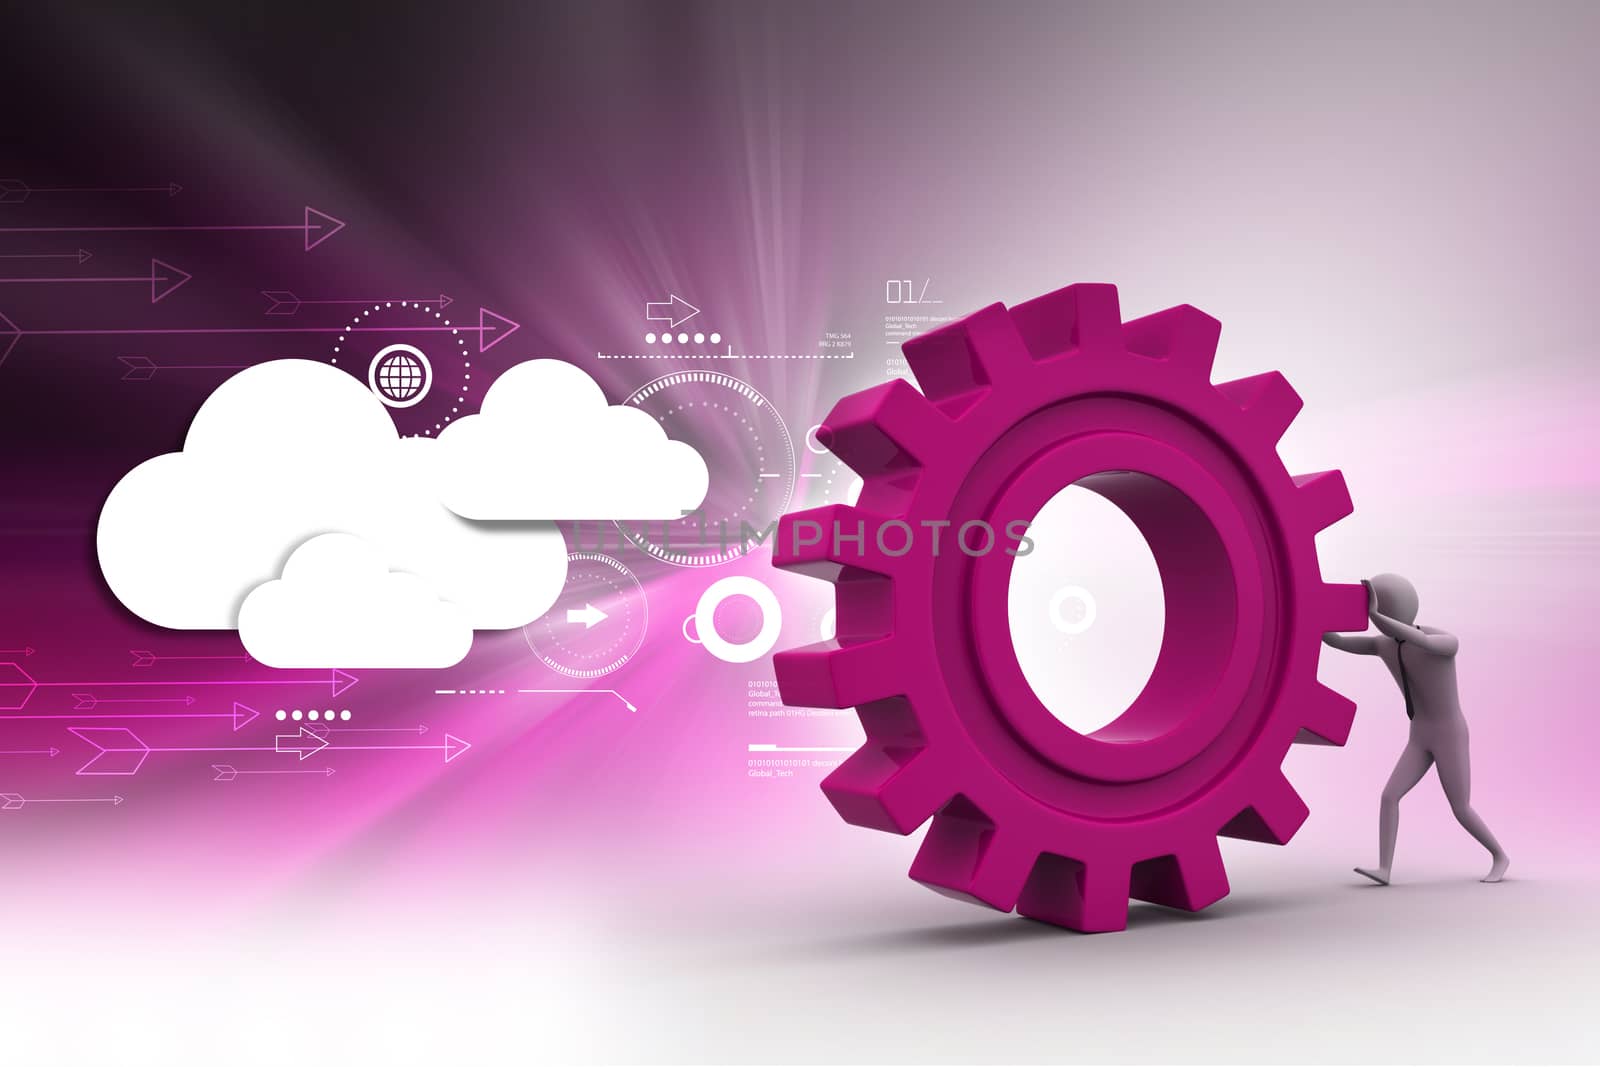 Man pushing gear wheel in color background